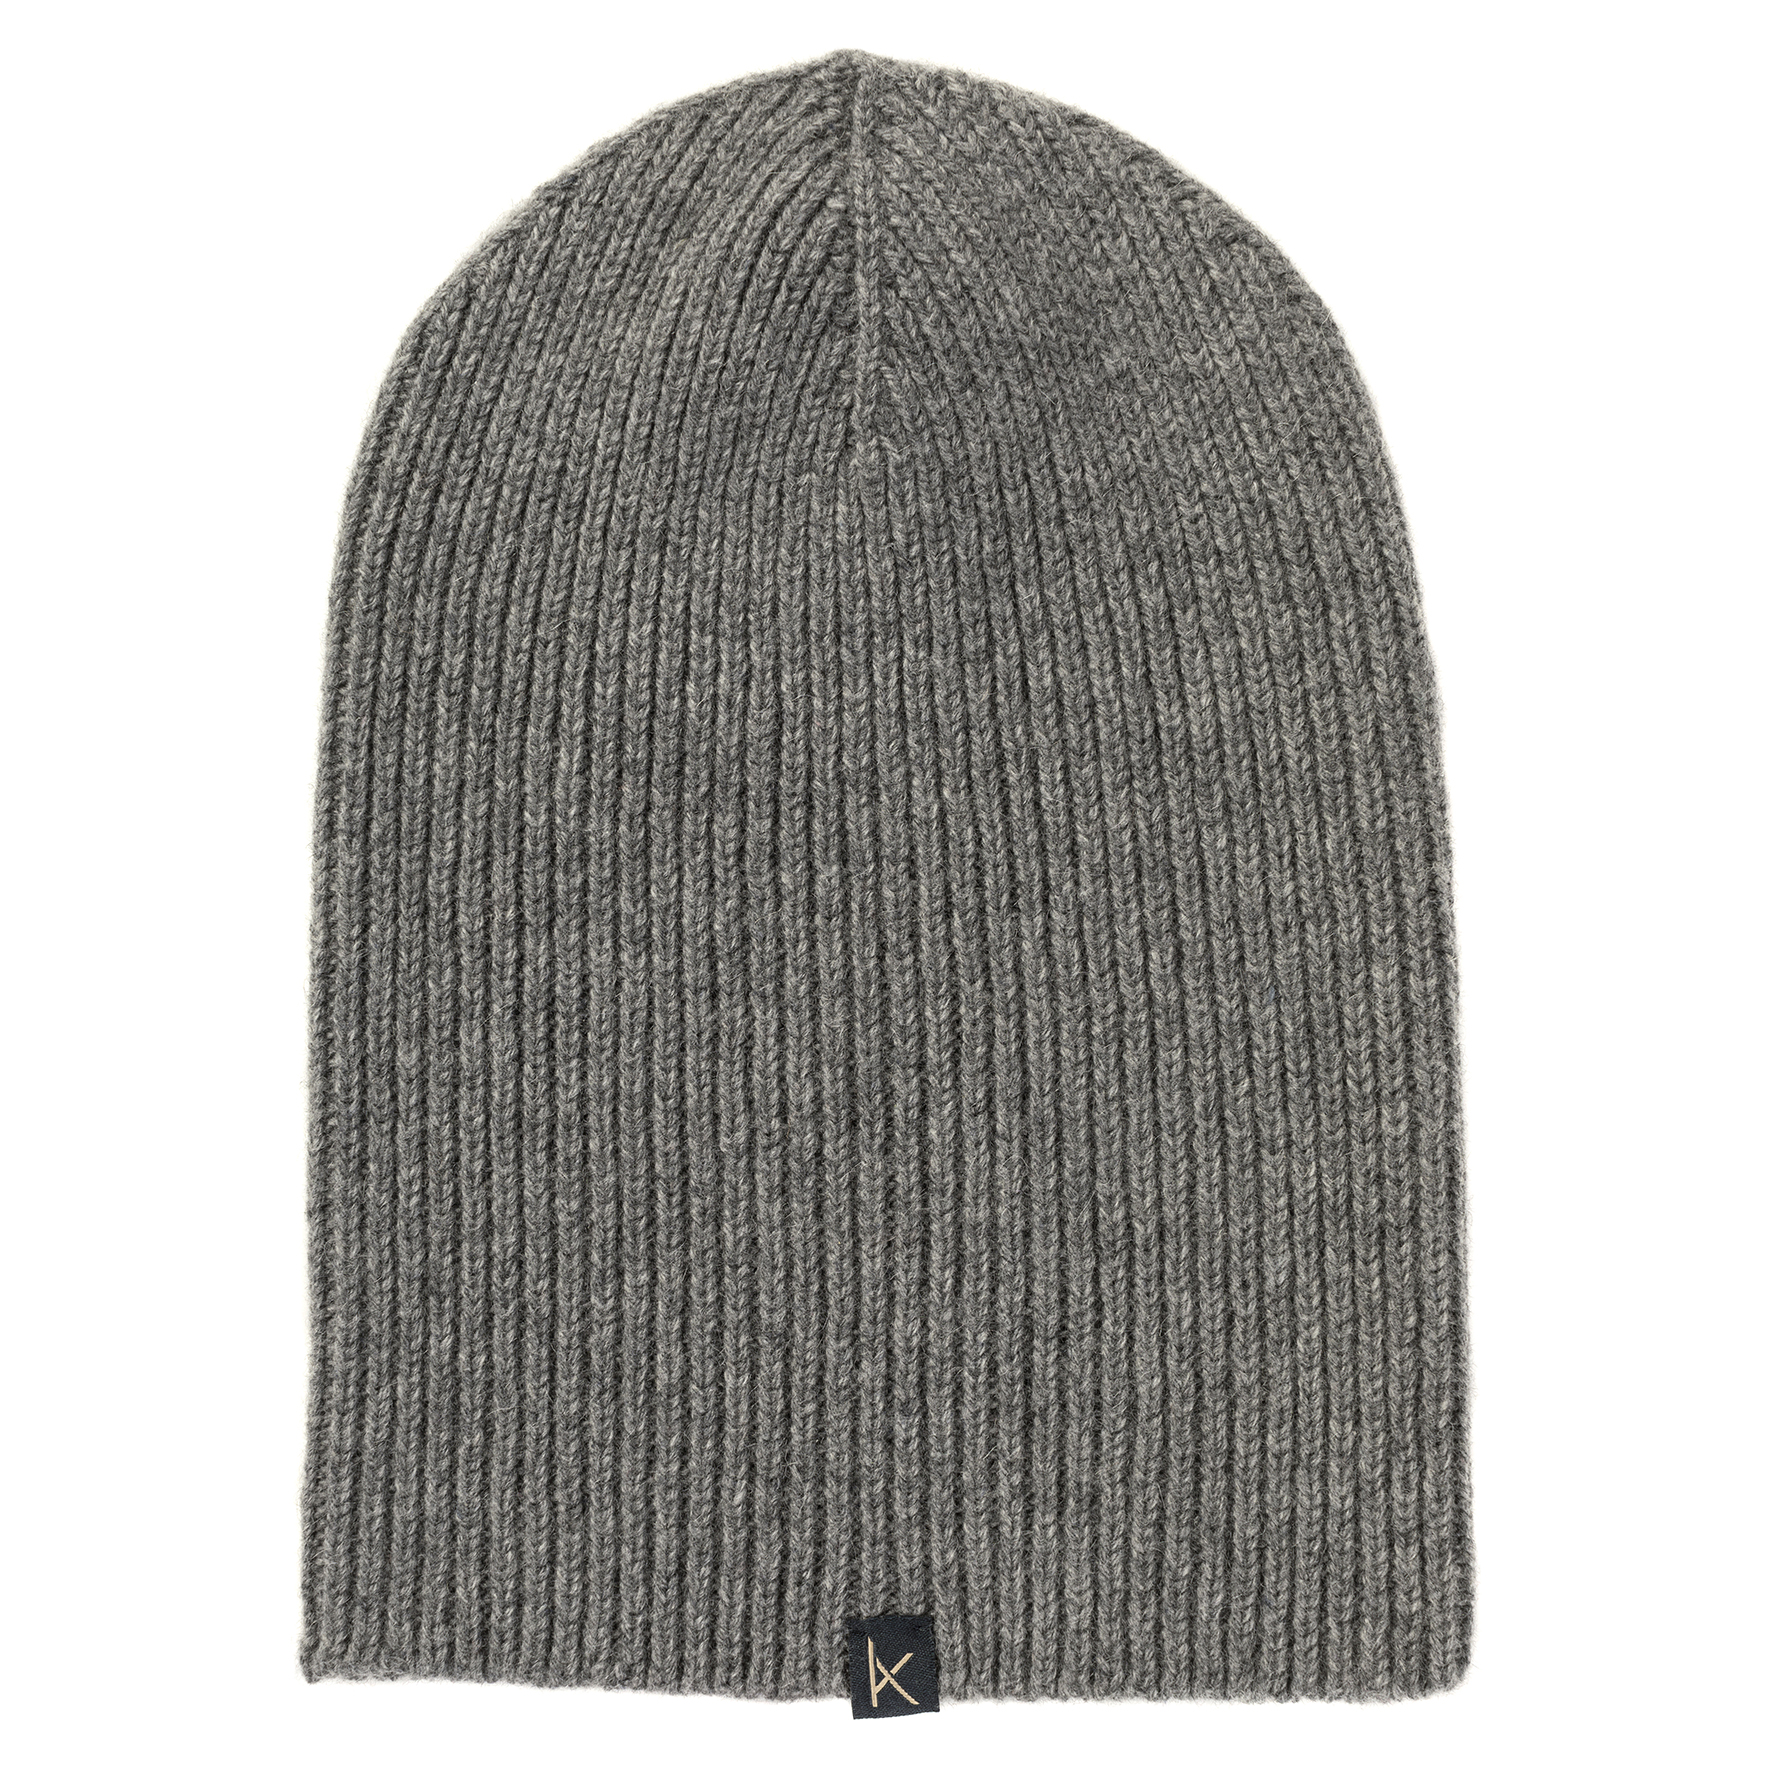 Cashmere Beanie Hats for Men - Made in Scotland